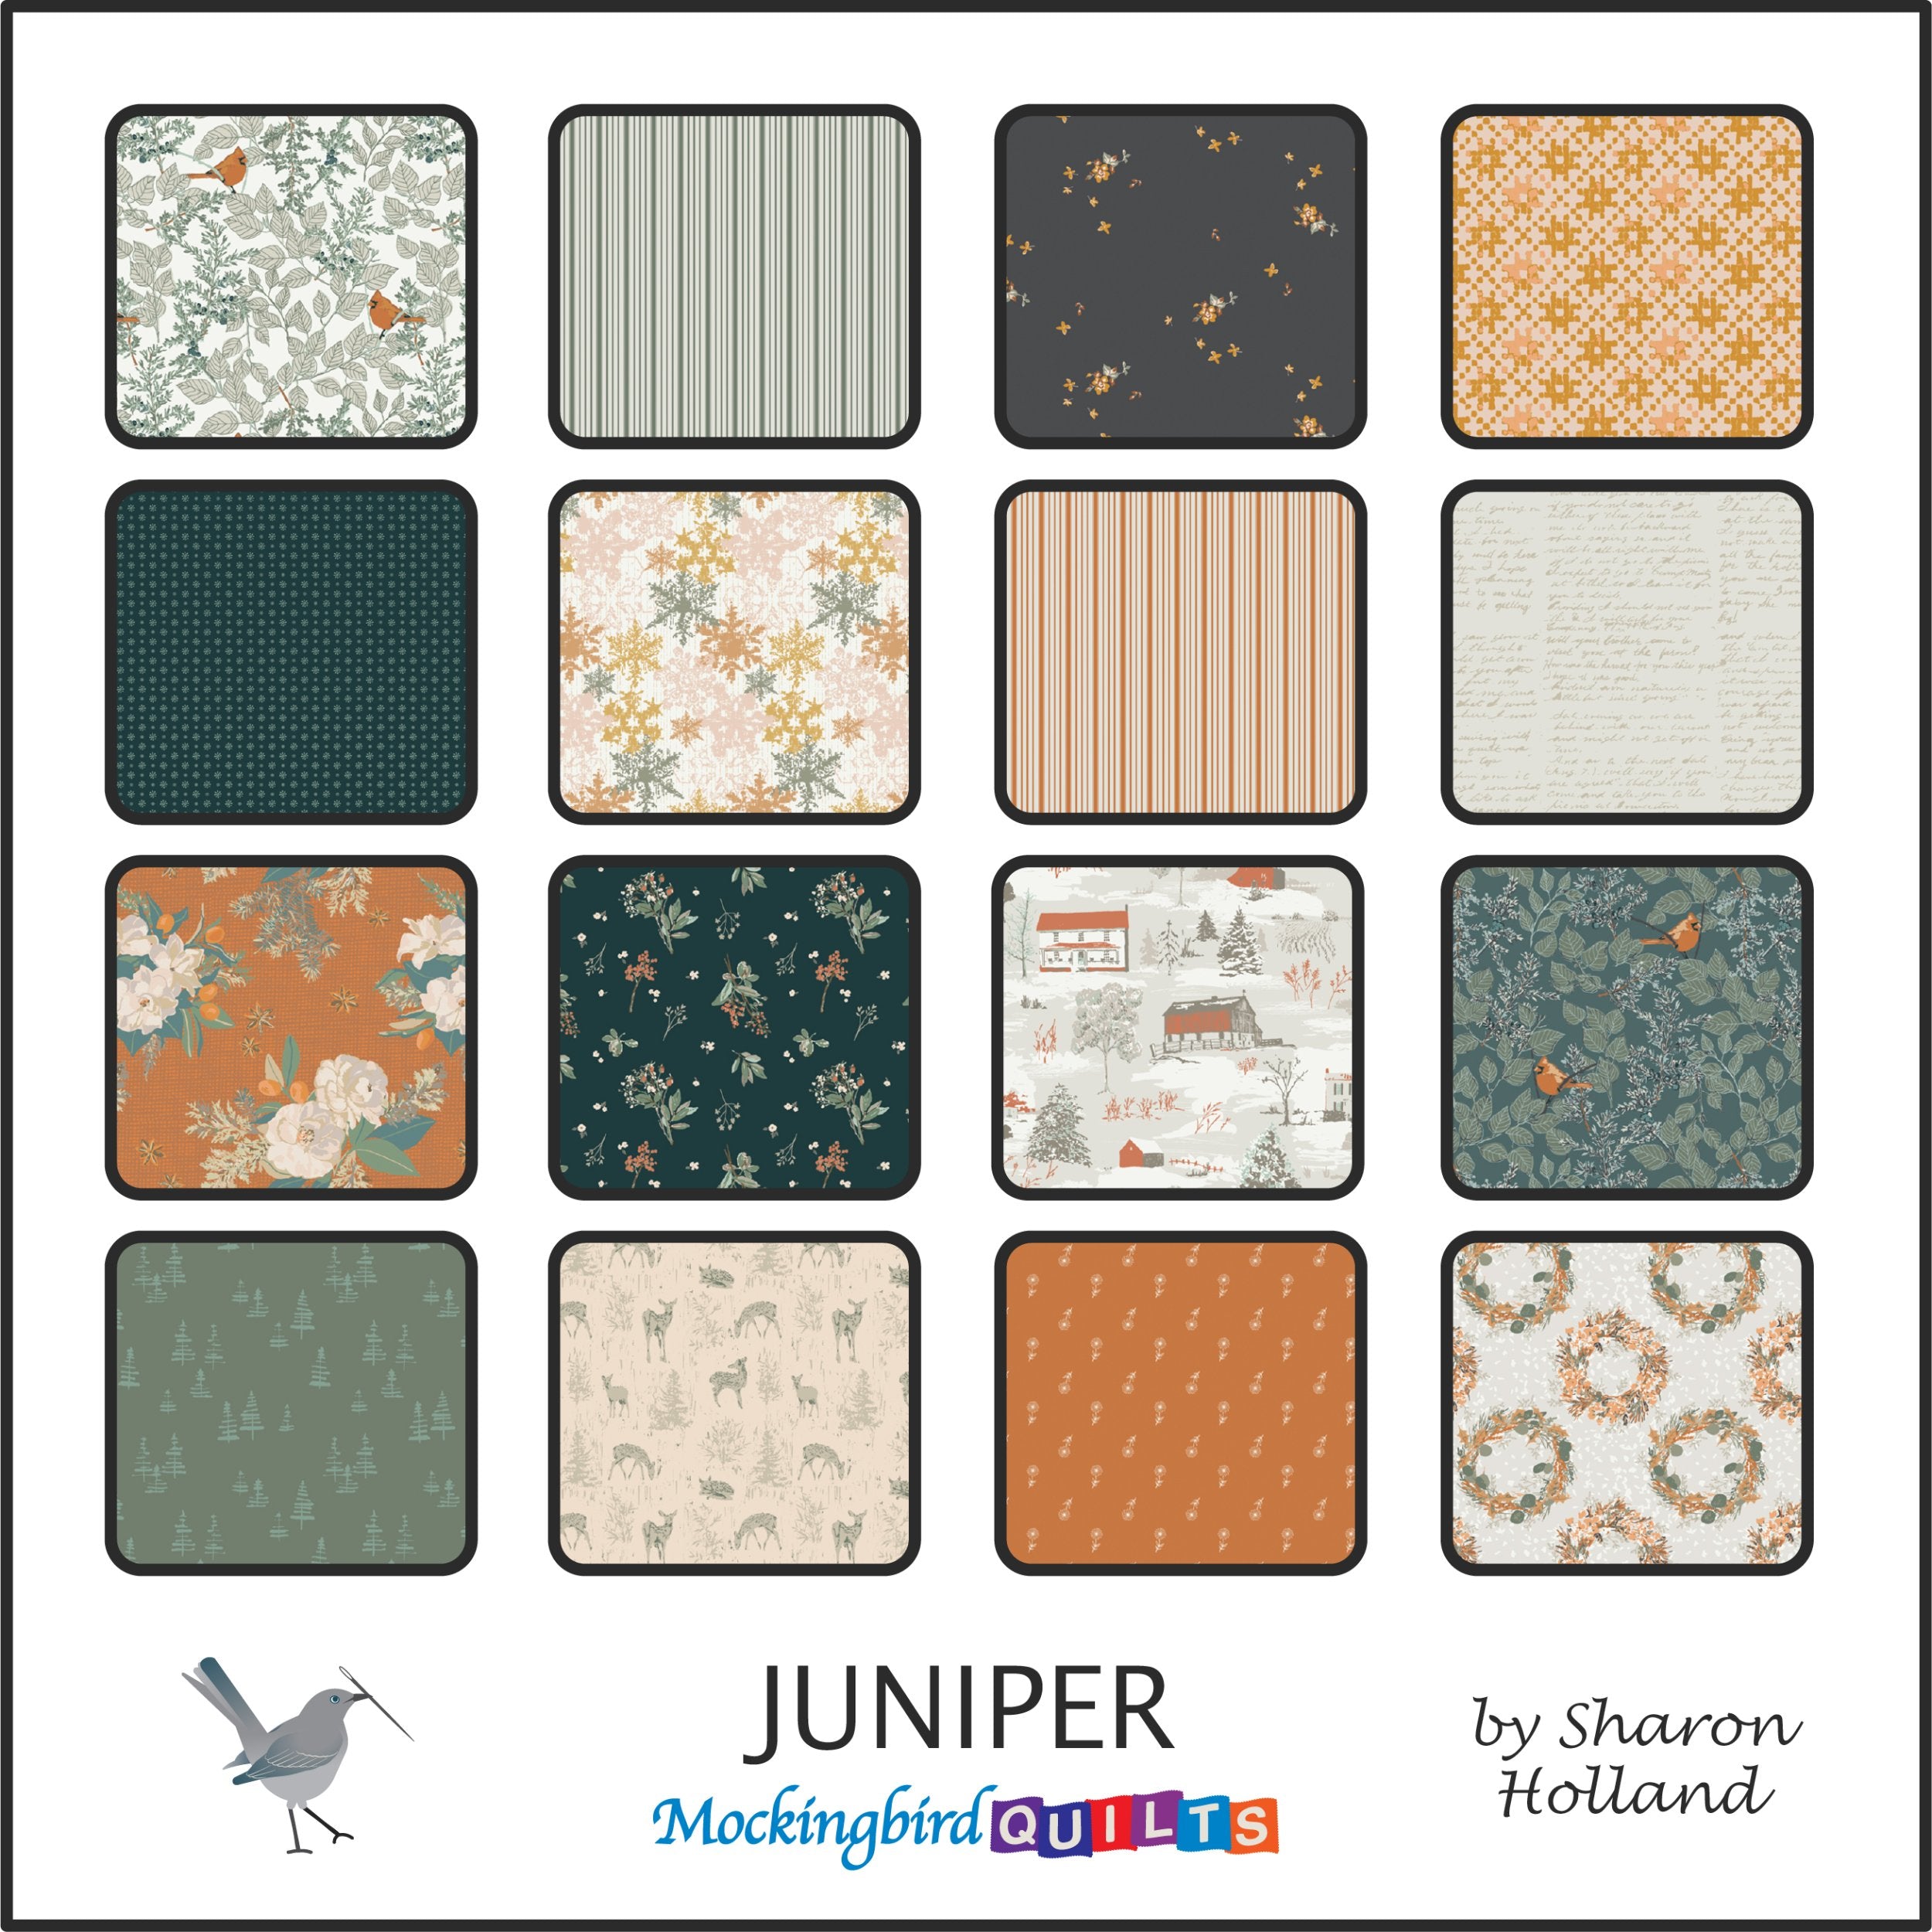 The image shows sixteen fabric swatches from the collection “Juniper” by Sharon Holland. The swatches are in a variety of colors like navy, burnt orange, and gray; the patterns are nature inspired, for example cardinals in greenery.